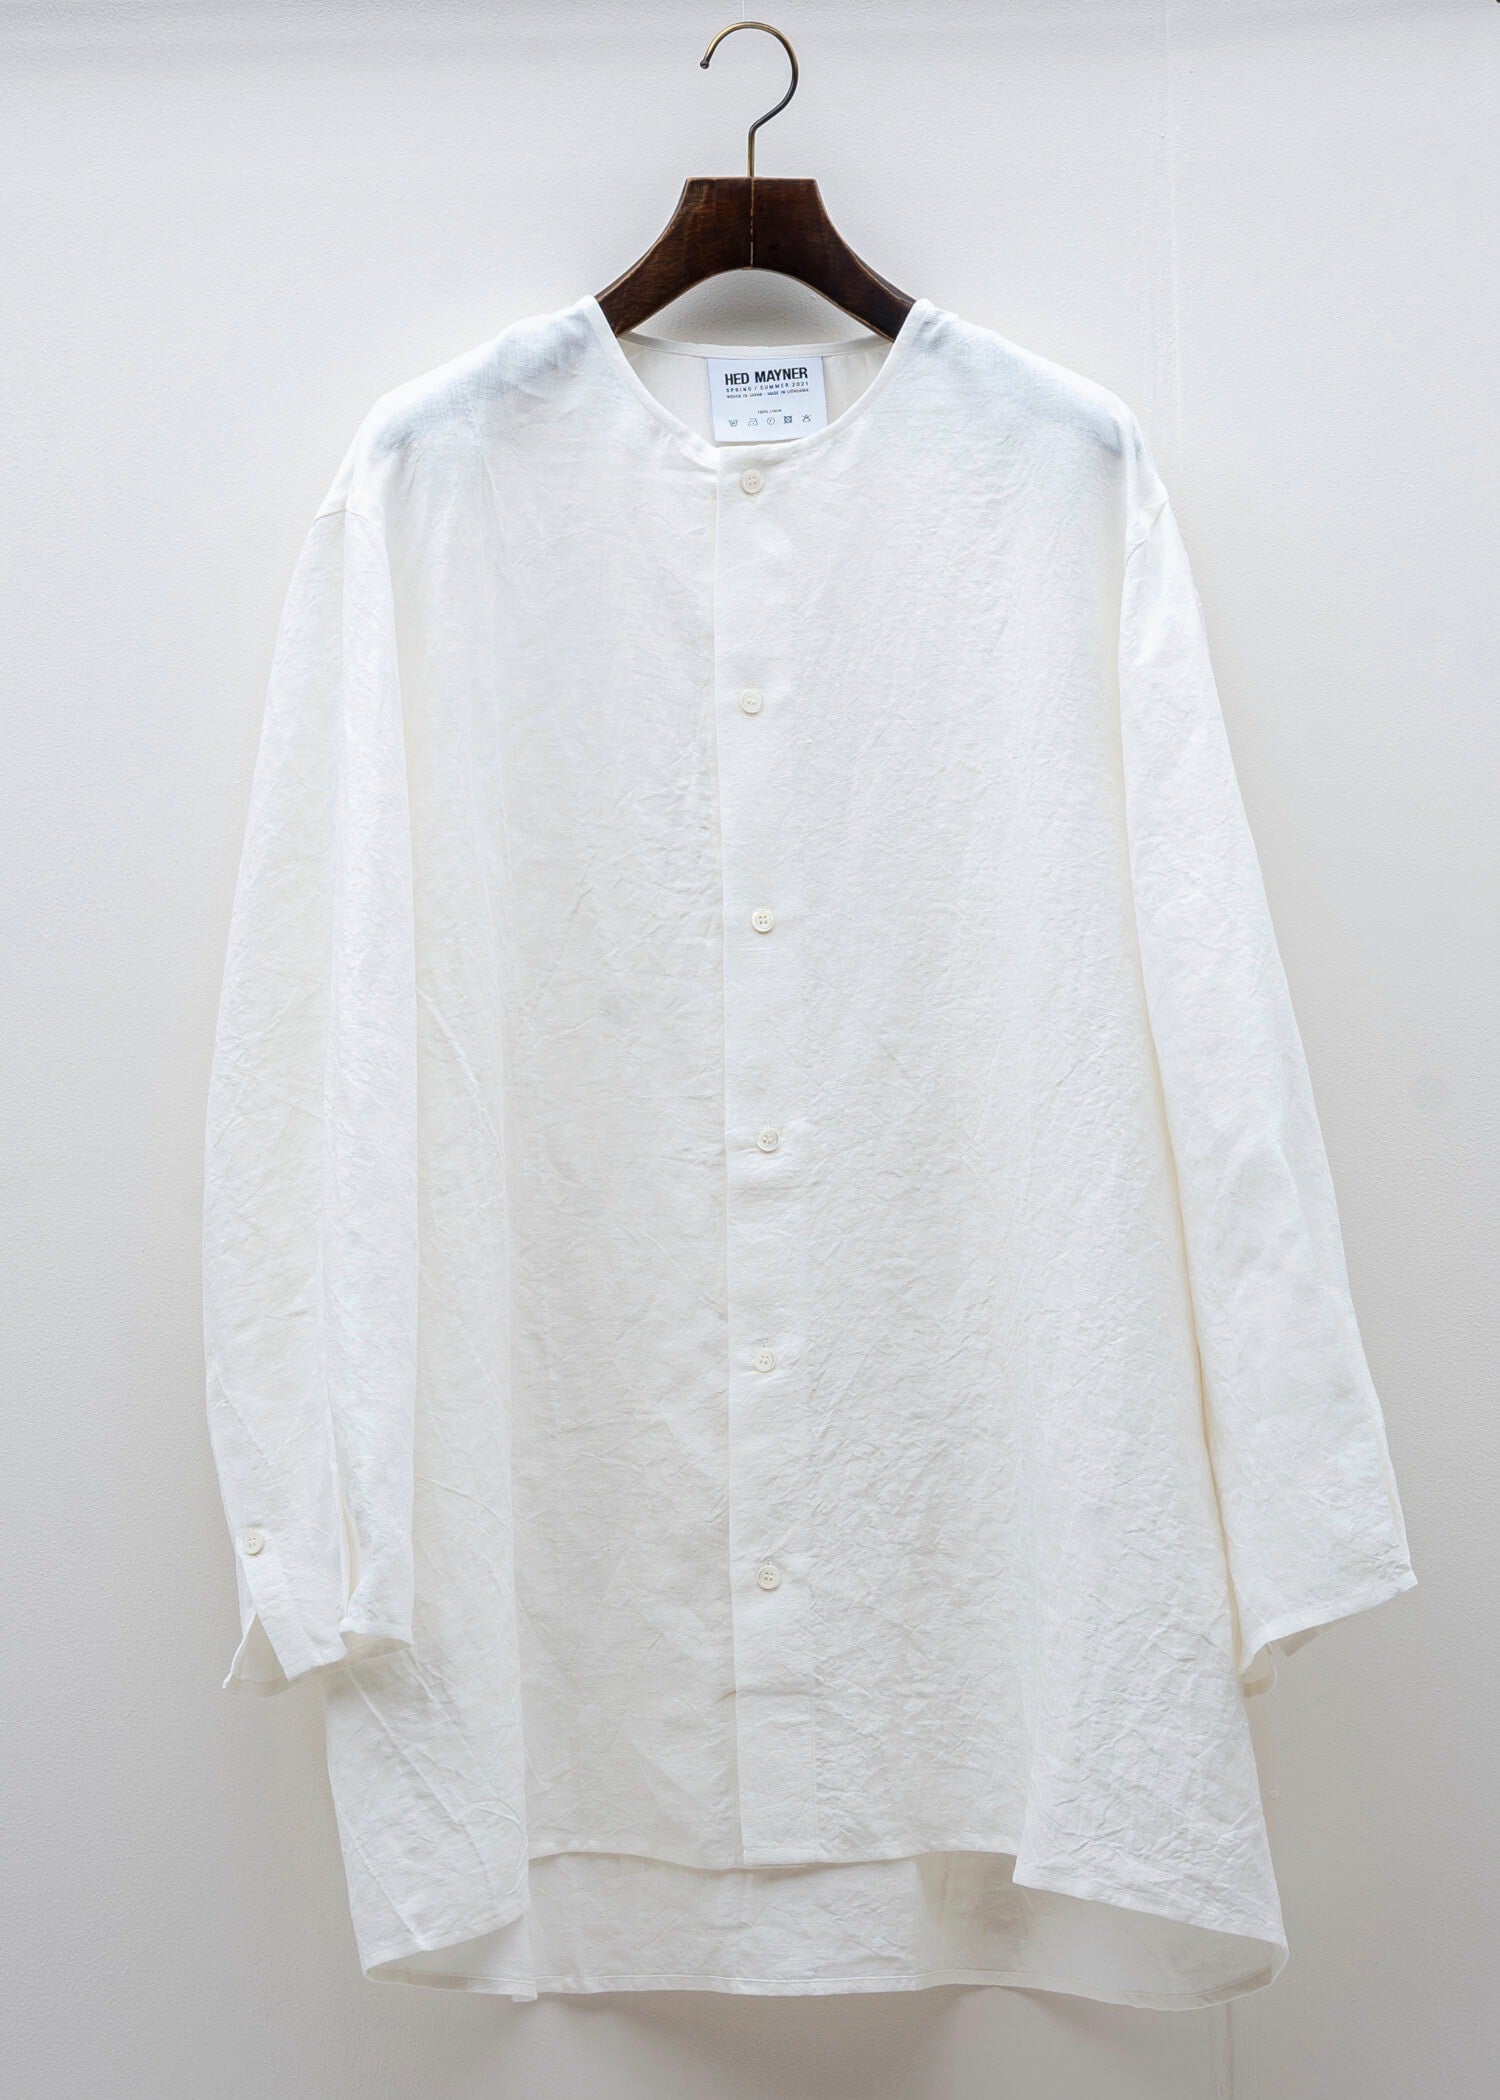 HED MAYNER / COLLARLESS BUTTON SHIRT / WHITE LINEN